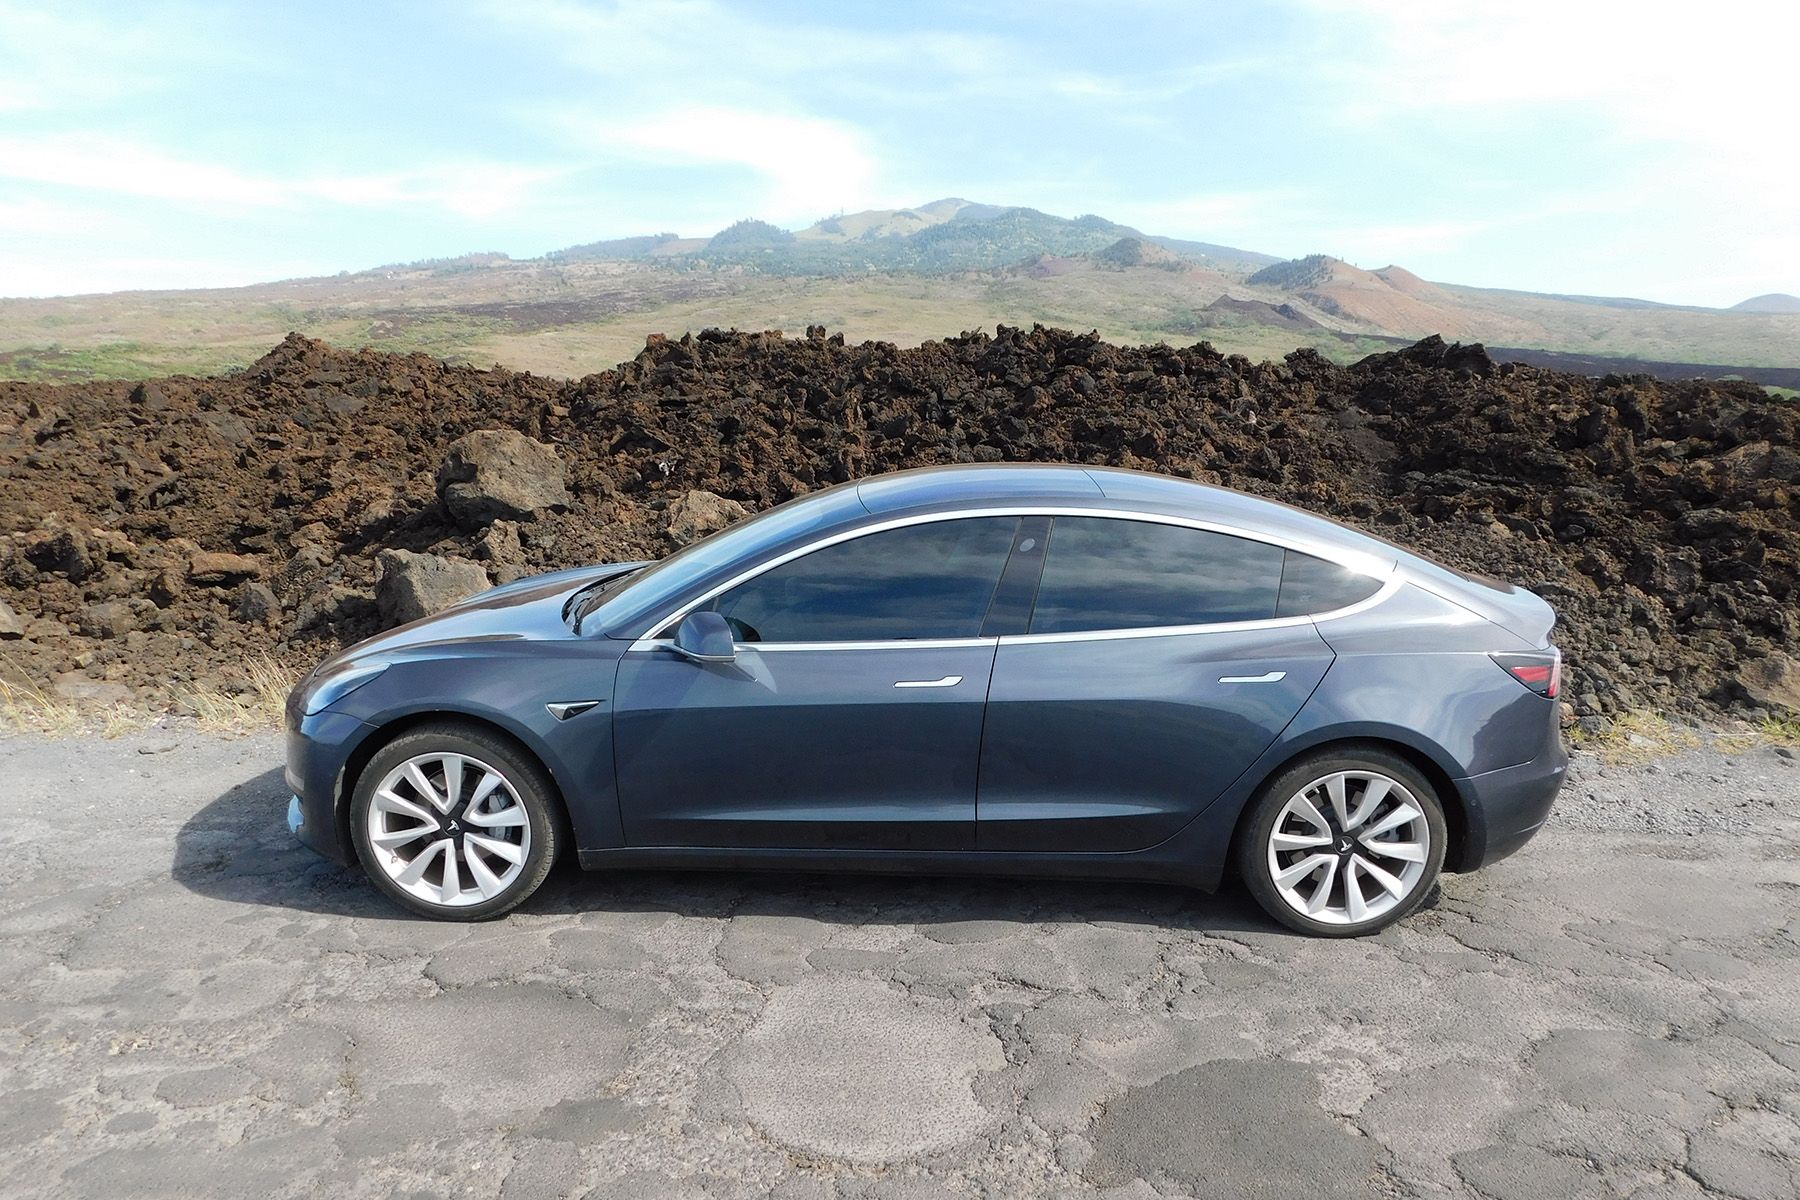 Images show off what may be new Tesla Model 3, Internet loves it